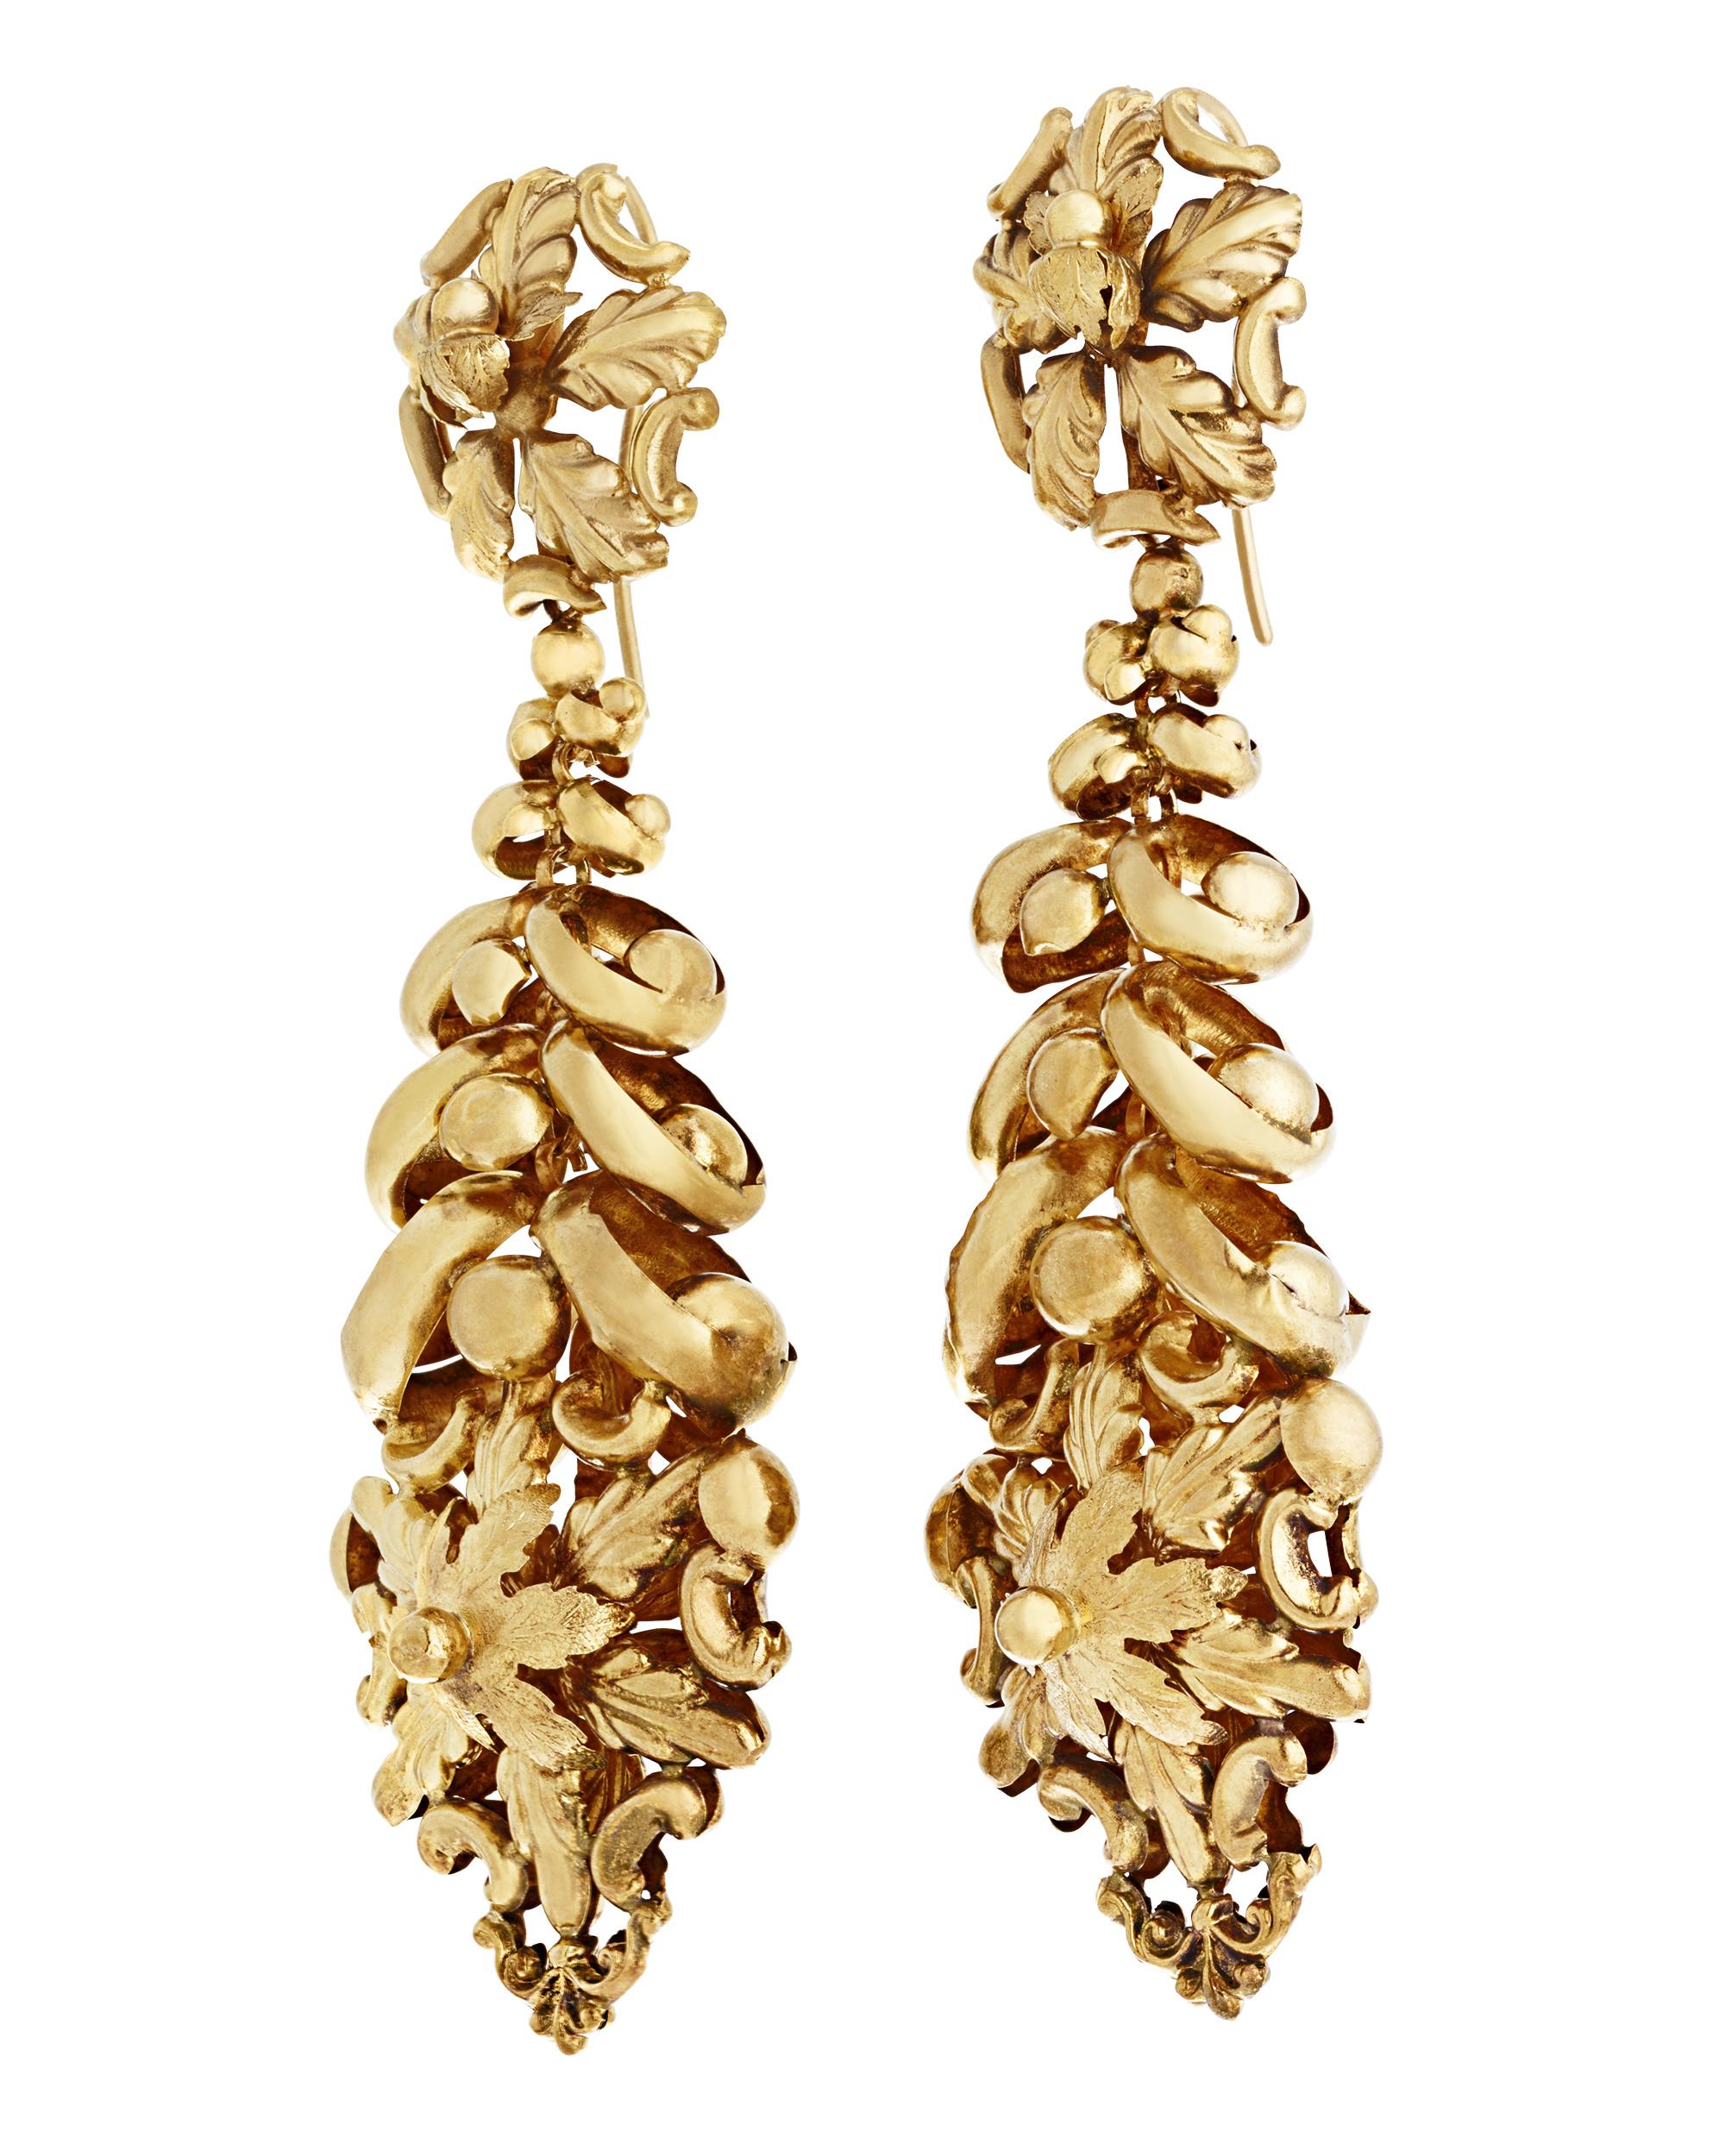 Cinematic glamour and drama are on full display with this beautiful pair of earrings once worn by Vivien Leigh in her role as Cleopatra in the 1945 British film, Caesar and Cleopatra. Known for her dozens of roles on stage and screen, Leigh was a